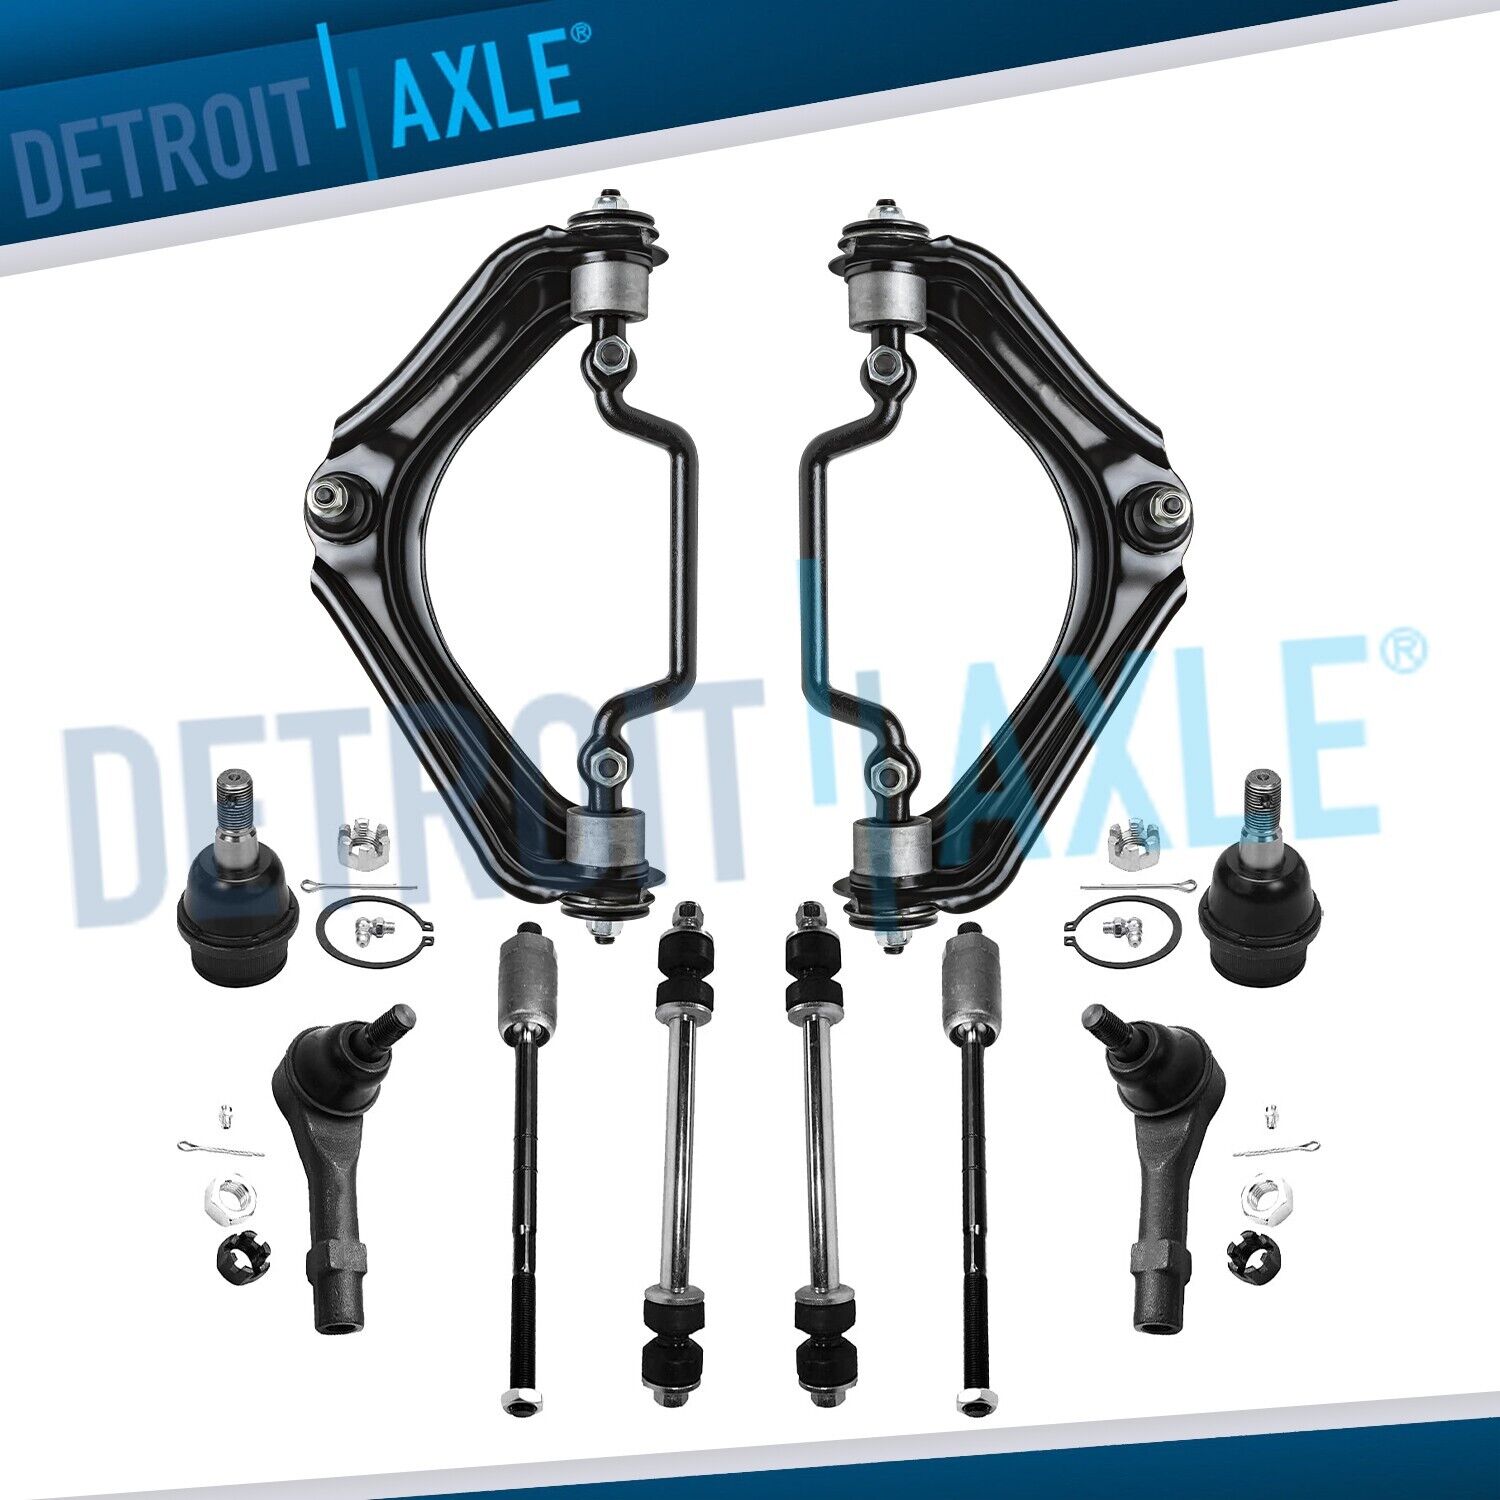 10pc Front Upper Control Arms Sway Bars Suspension Kit for Ford Explorer Mercury